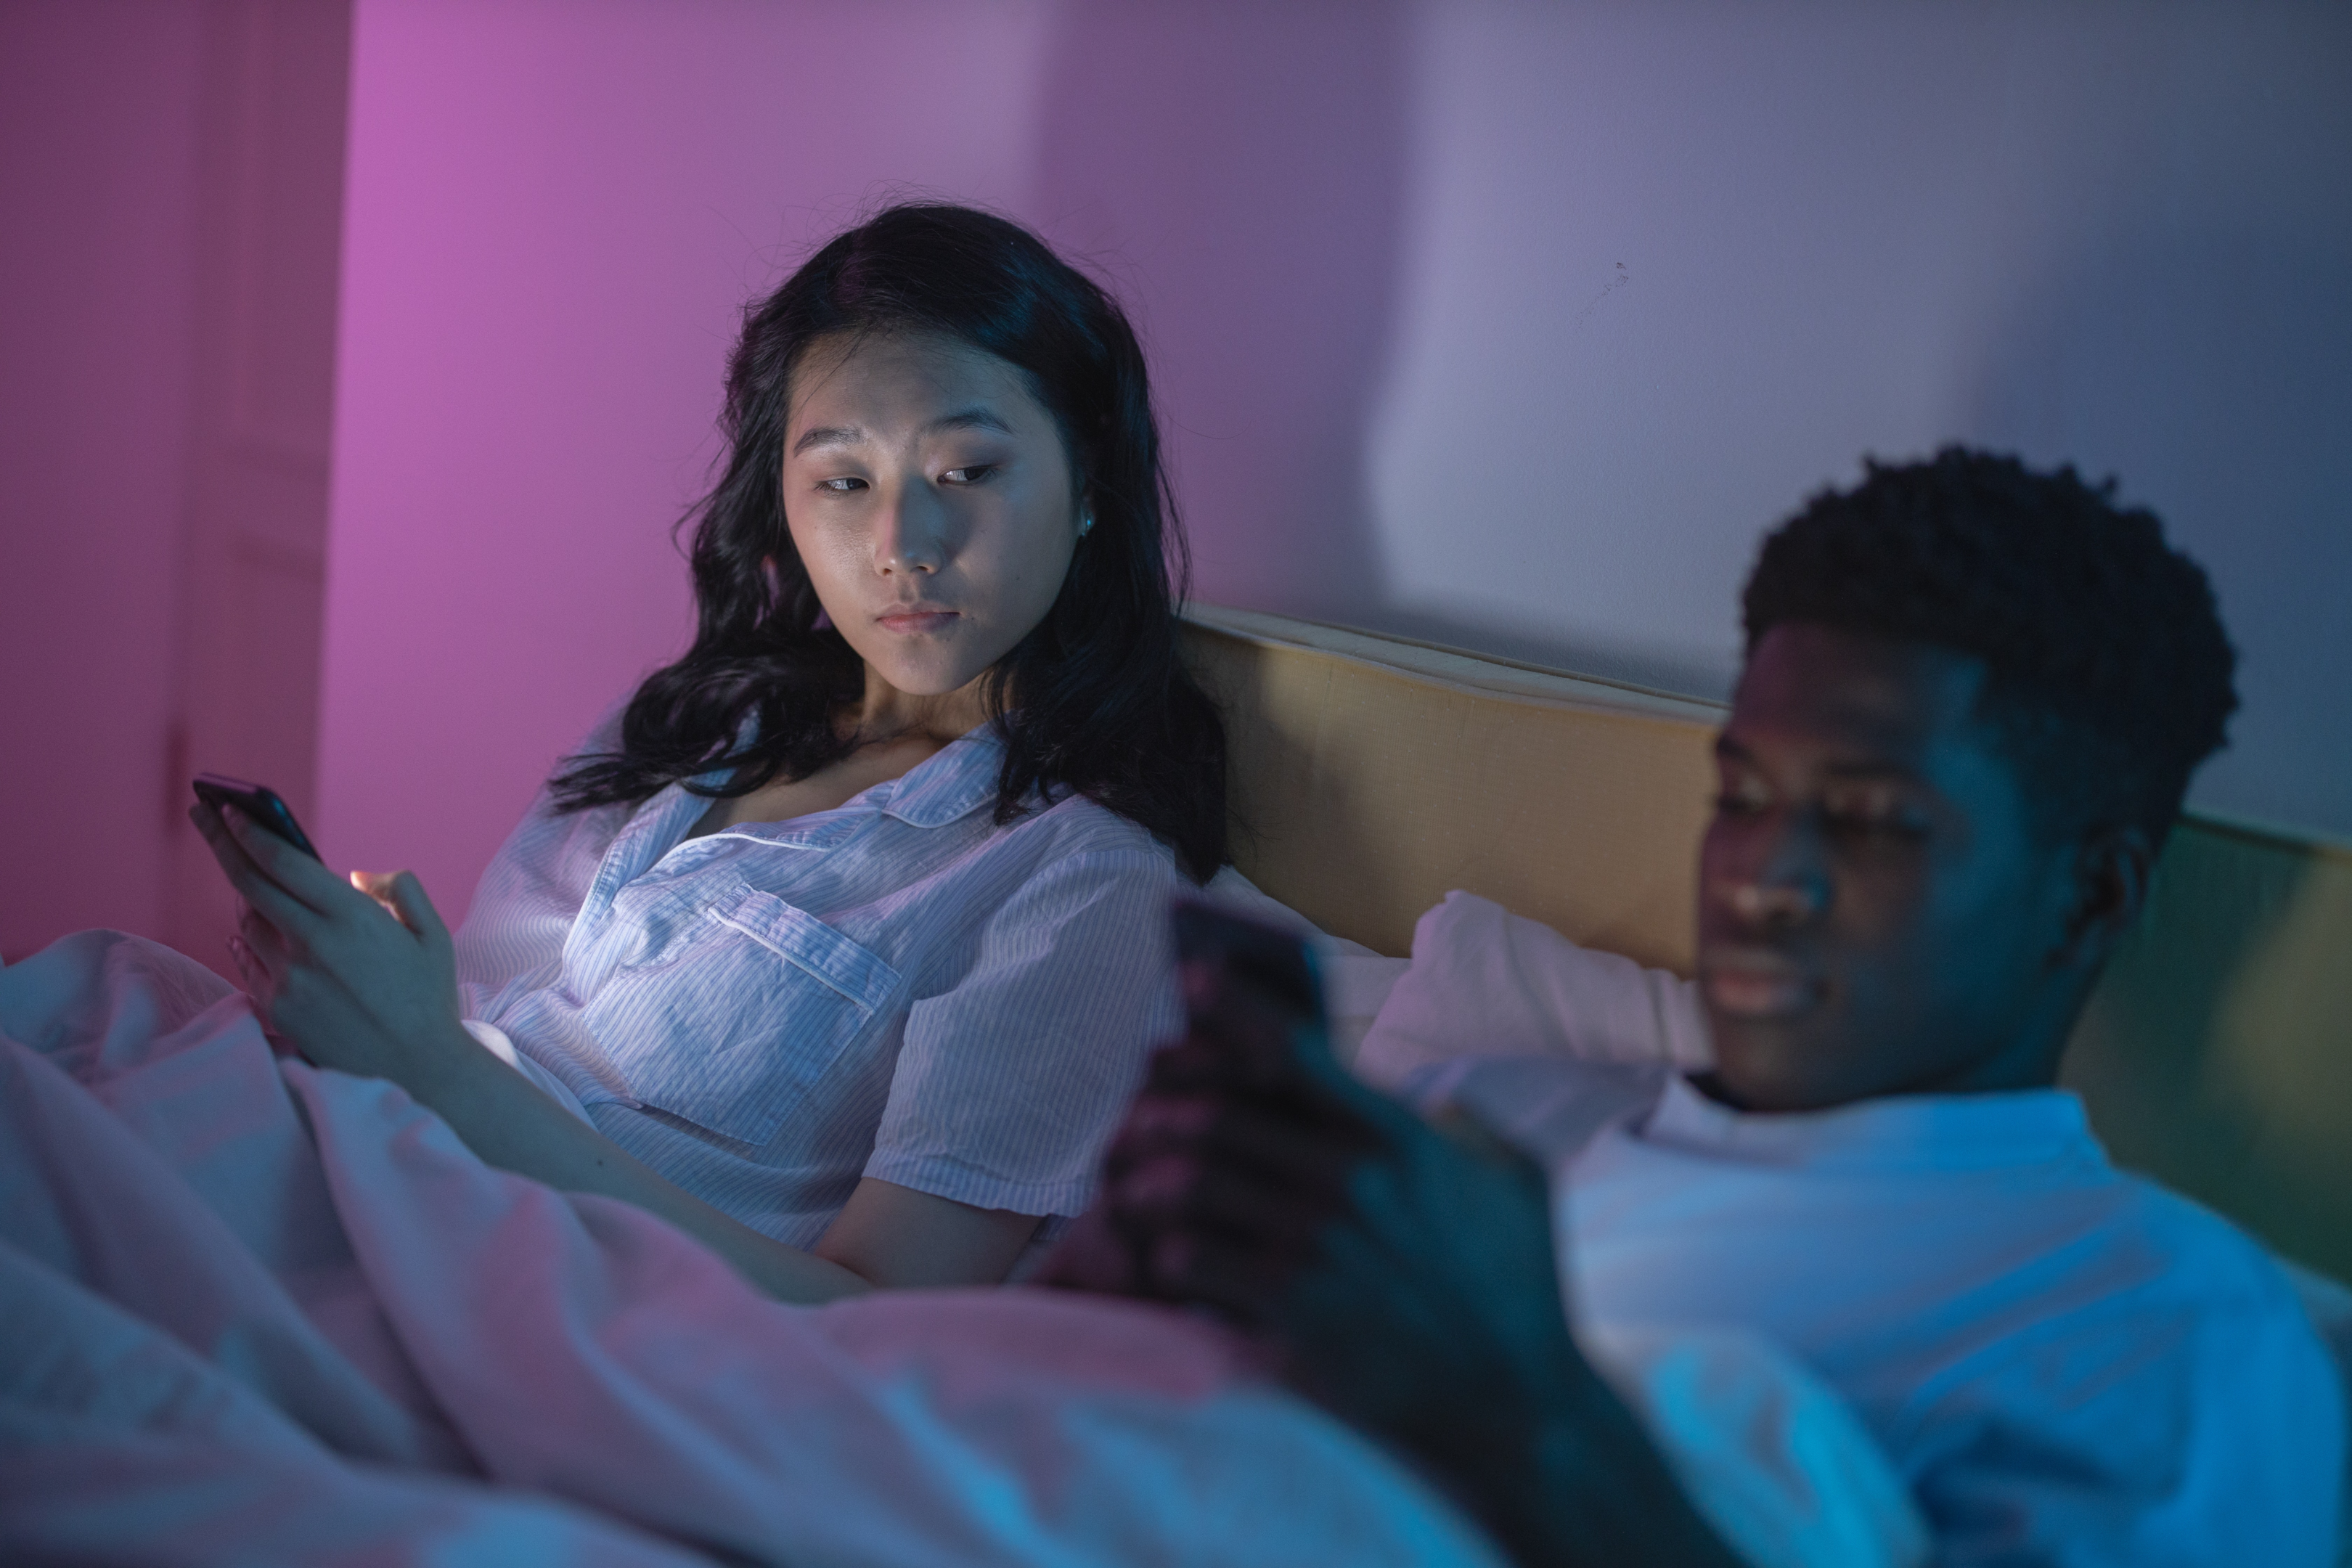 couple in bed, women looking over boyfriend shoulder with jealousy 